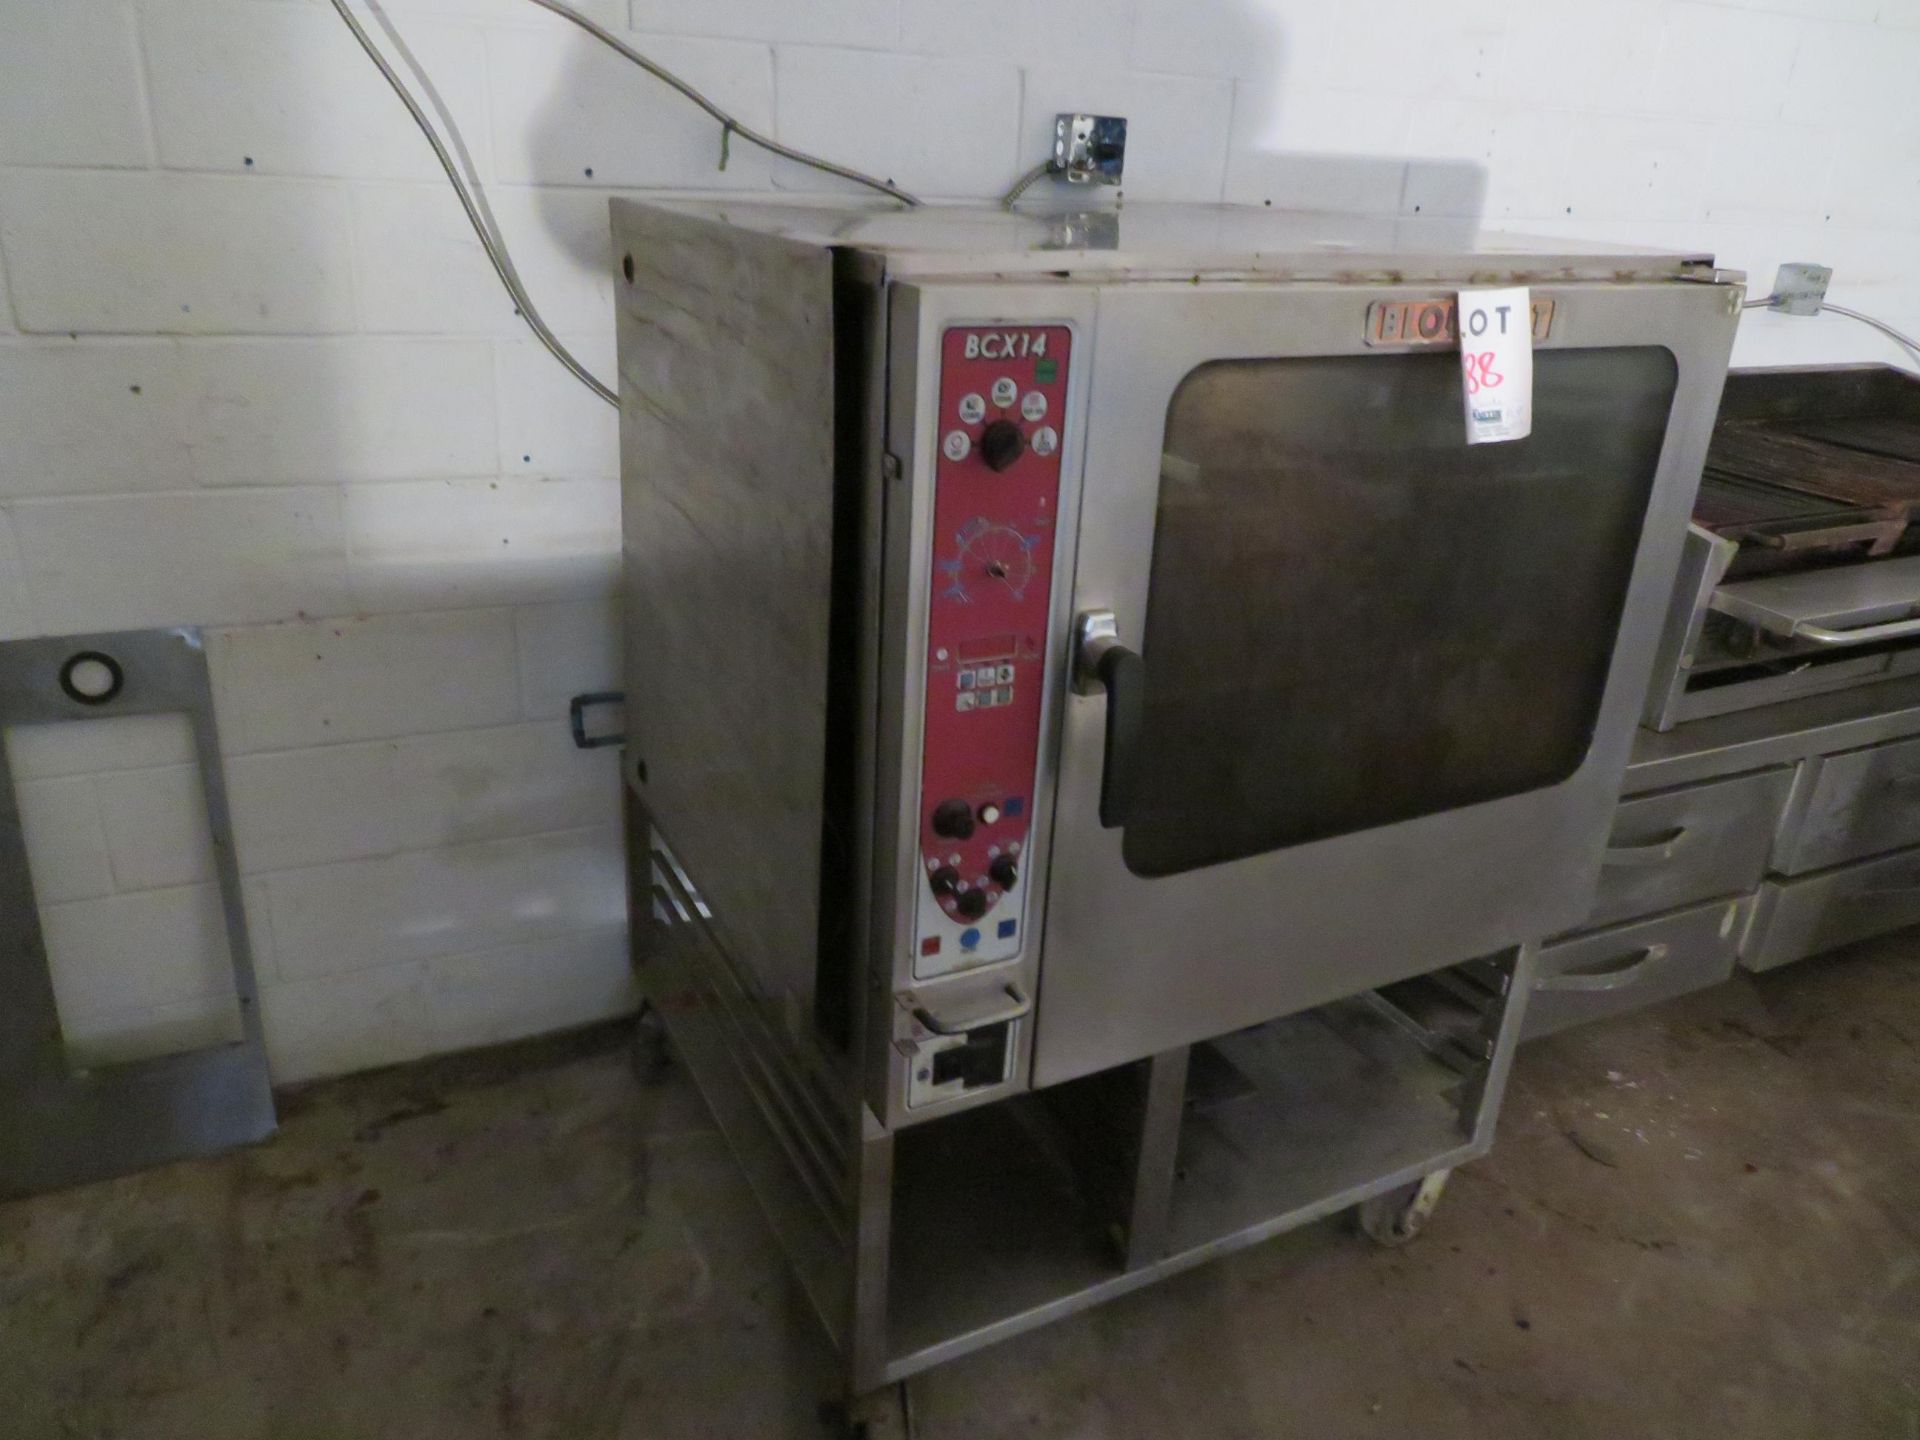 BLODGETT commercial oven with rack on wheels, Mod #BCX14 approx. 40"w x 37"d x 56"h - Image 2 of 4